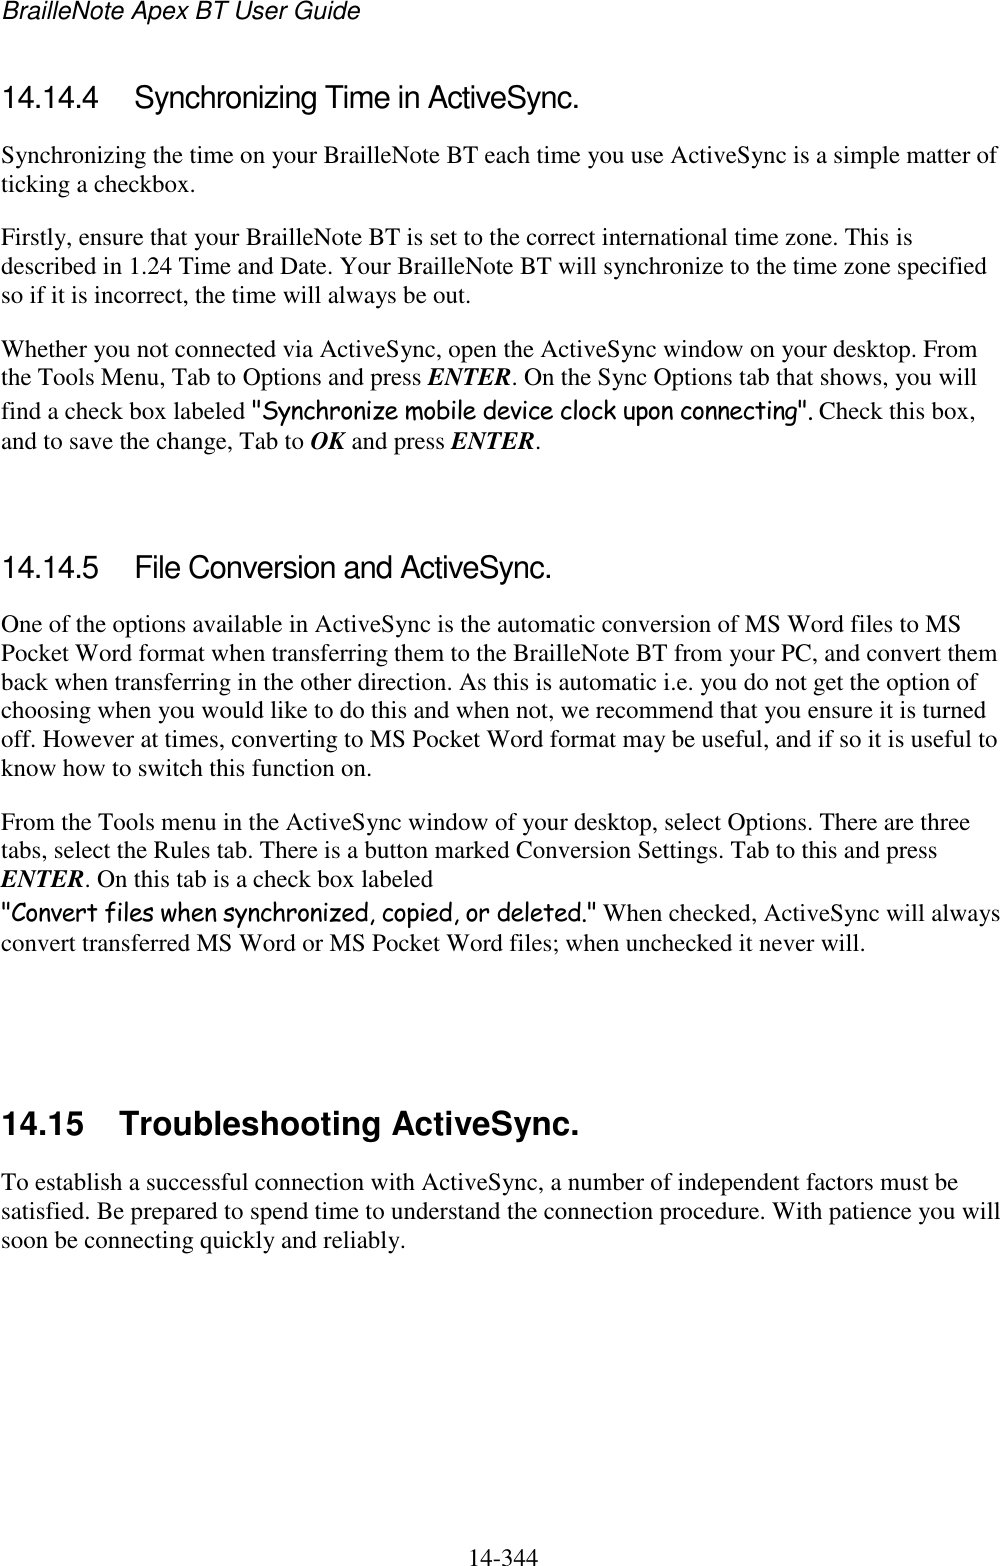 BrailleNote Apex BT User Guide   14-344   14.14.4  Synchronizing Time in ActiveSync. Synchronizing the time on your BrailleNote BT each time you use ActiveSync is a simple matter of ticking a checkbox. Firstly, ensure that your BrailleNote BT is set to the correct international time zone. This is described in 1.24 Time and Date. Your BrailleNote BT will synchronize to the time zone specified so if it is incorrect, the time will always be out. Whether you not connected via ActiveSync, open the ActiveSync window on your desktop. From the Tools Menu, Tab to Options and press ENTER. On the Sync Options tab that shows, you will find a check box labeled &quot;Synchronize mobile device clock upon connecting&quot;. Check this box, and to save the change, Tab to OK and press ENTER.   14.14.5  File Conversion and ActiveSync. One of the options available in ActiveSync is the automatic conversion of MS Word files to MS Pocket Word format when transferring them to the BrailleNote BT from your PC, and convert them back when transferring in the other direction. As this is automatic i.e. you do not get the option of choosing when you would like to do this and when not, we recommend that you ensure it is turned off. However at times, converting to MS Pocket Word format may be useful, and if so it is useful to know how to switch this function on. From the Tools menu in the ActiveSync window of your desktop, select Options. There are three tabs, select the Rules tab. There is a button marked Conversion Settings. Tab to this and press ENTER. On this tab is a check box labeled &quot;Convert files when synchronized, copied, or deleted.&quot; When checked, ActiveSync will always convert transferred MS Word or MS Pocket Word files; when unchecked it never will.     14.15  Troubleshooting ActiveSync. To establish a successful connection with ActiveSync, a number of independent factors must be satisfied. Be prepared to spend time to understand the connection procedure. With patience you will soon be connecting quickly and reliably.   